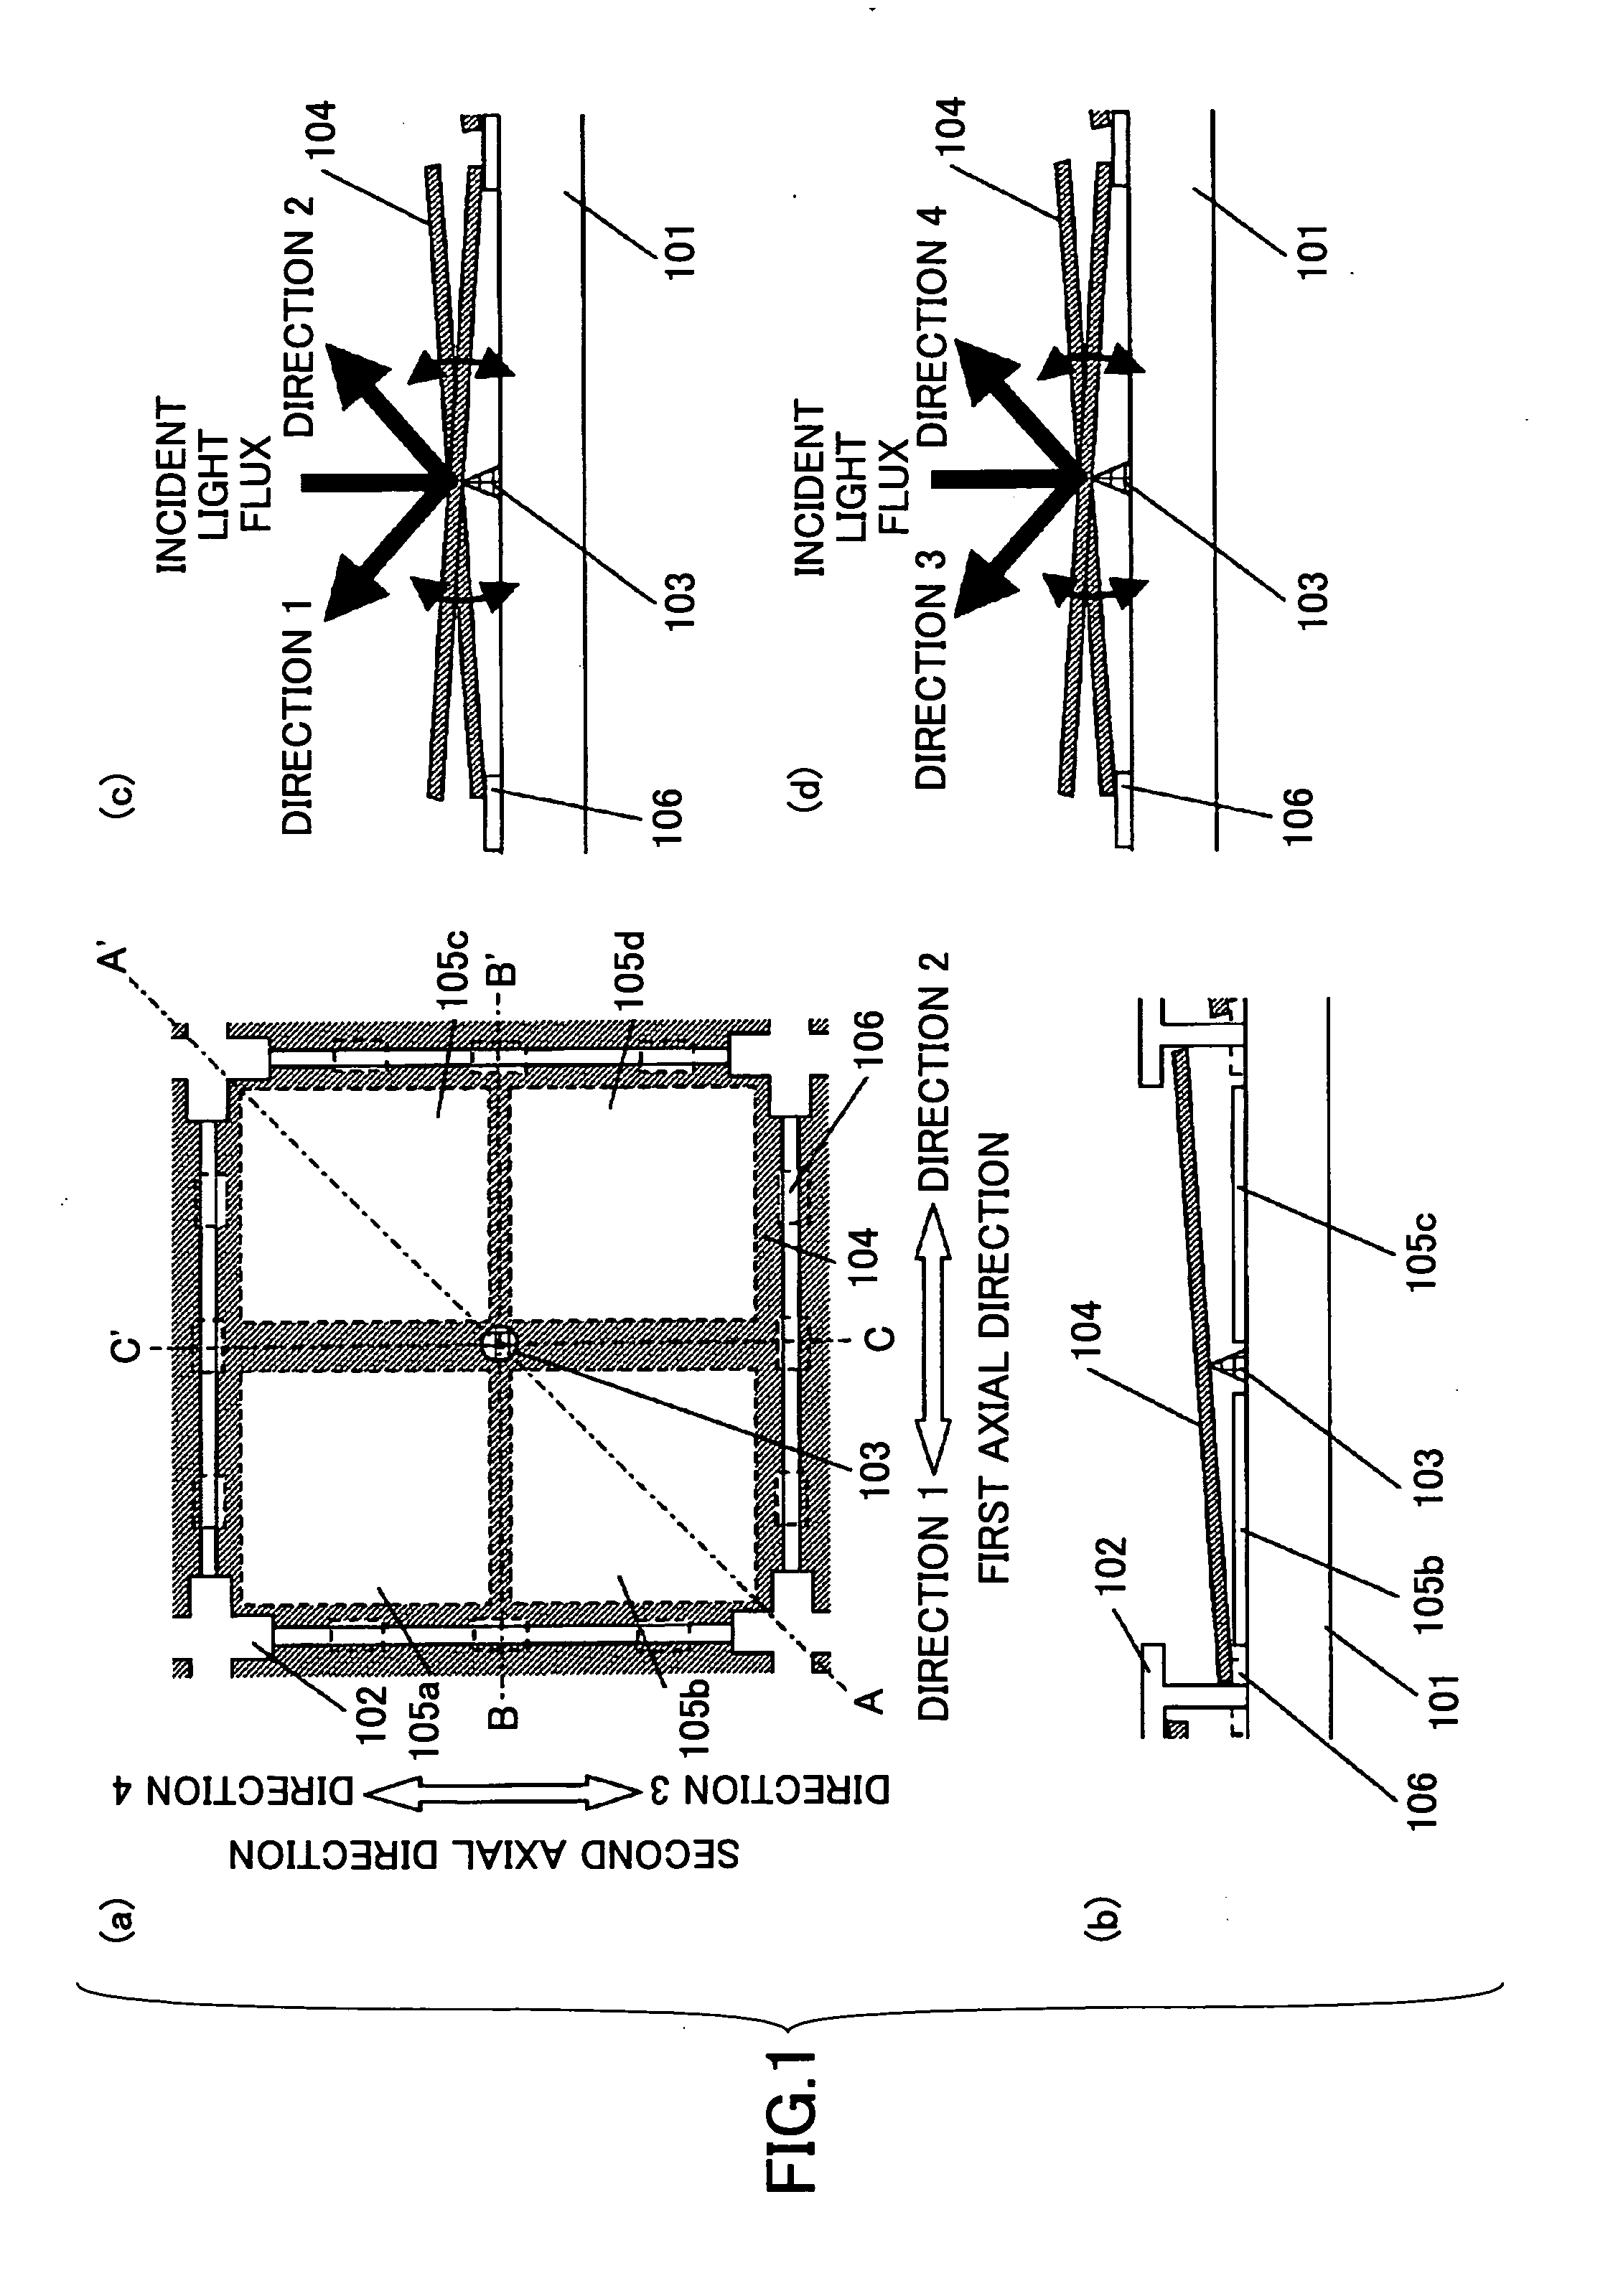 Light deflector, light deflection array, optical system, image forming device, and projection type image display apparatus